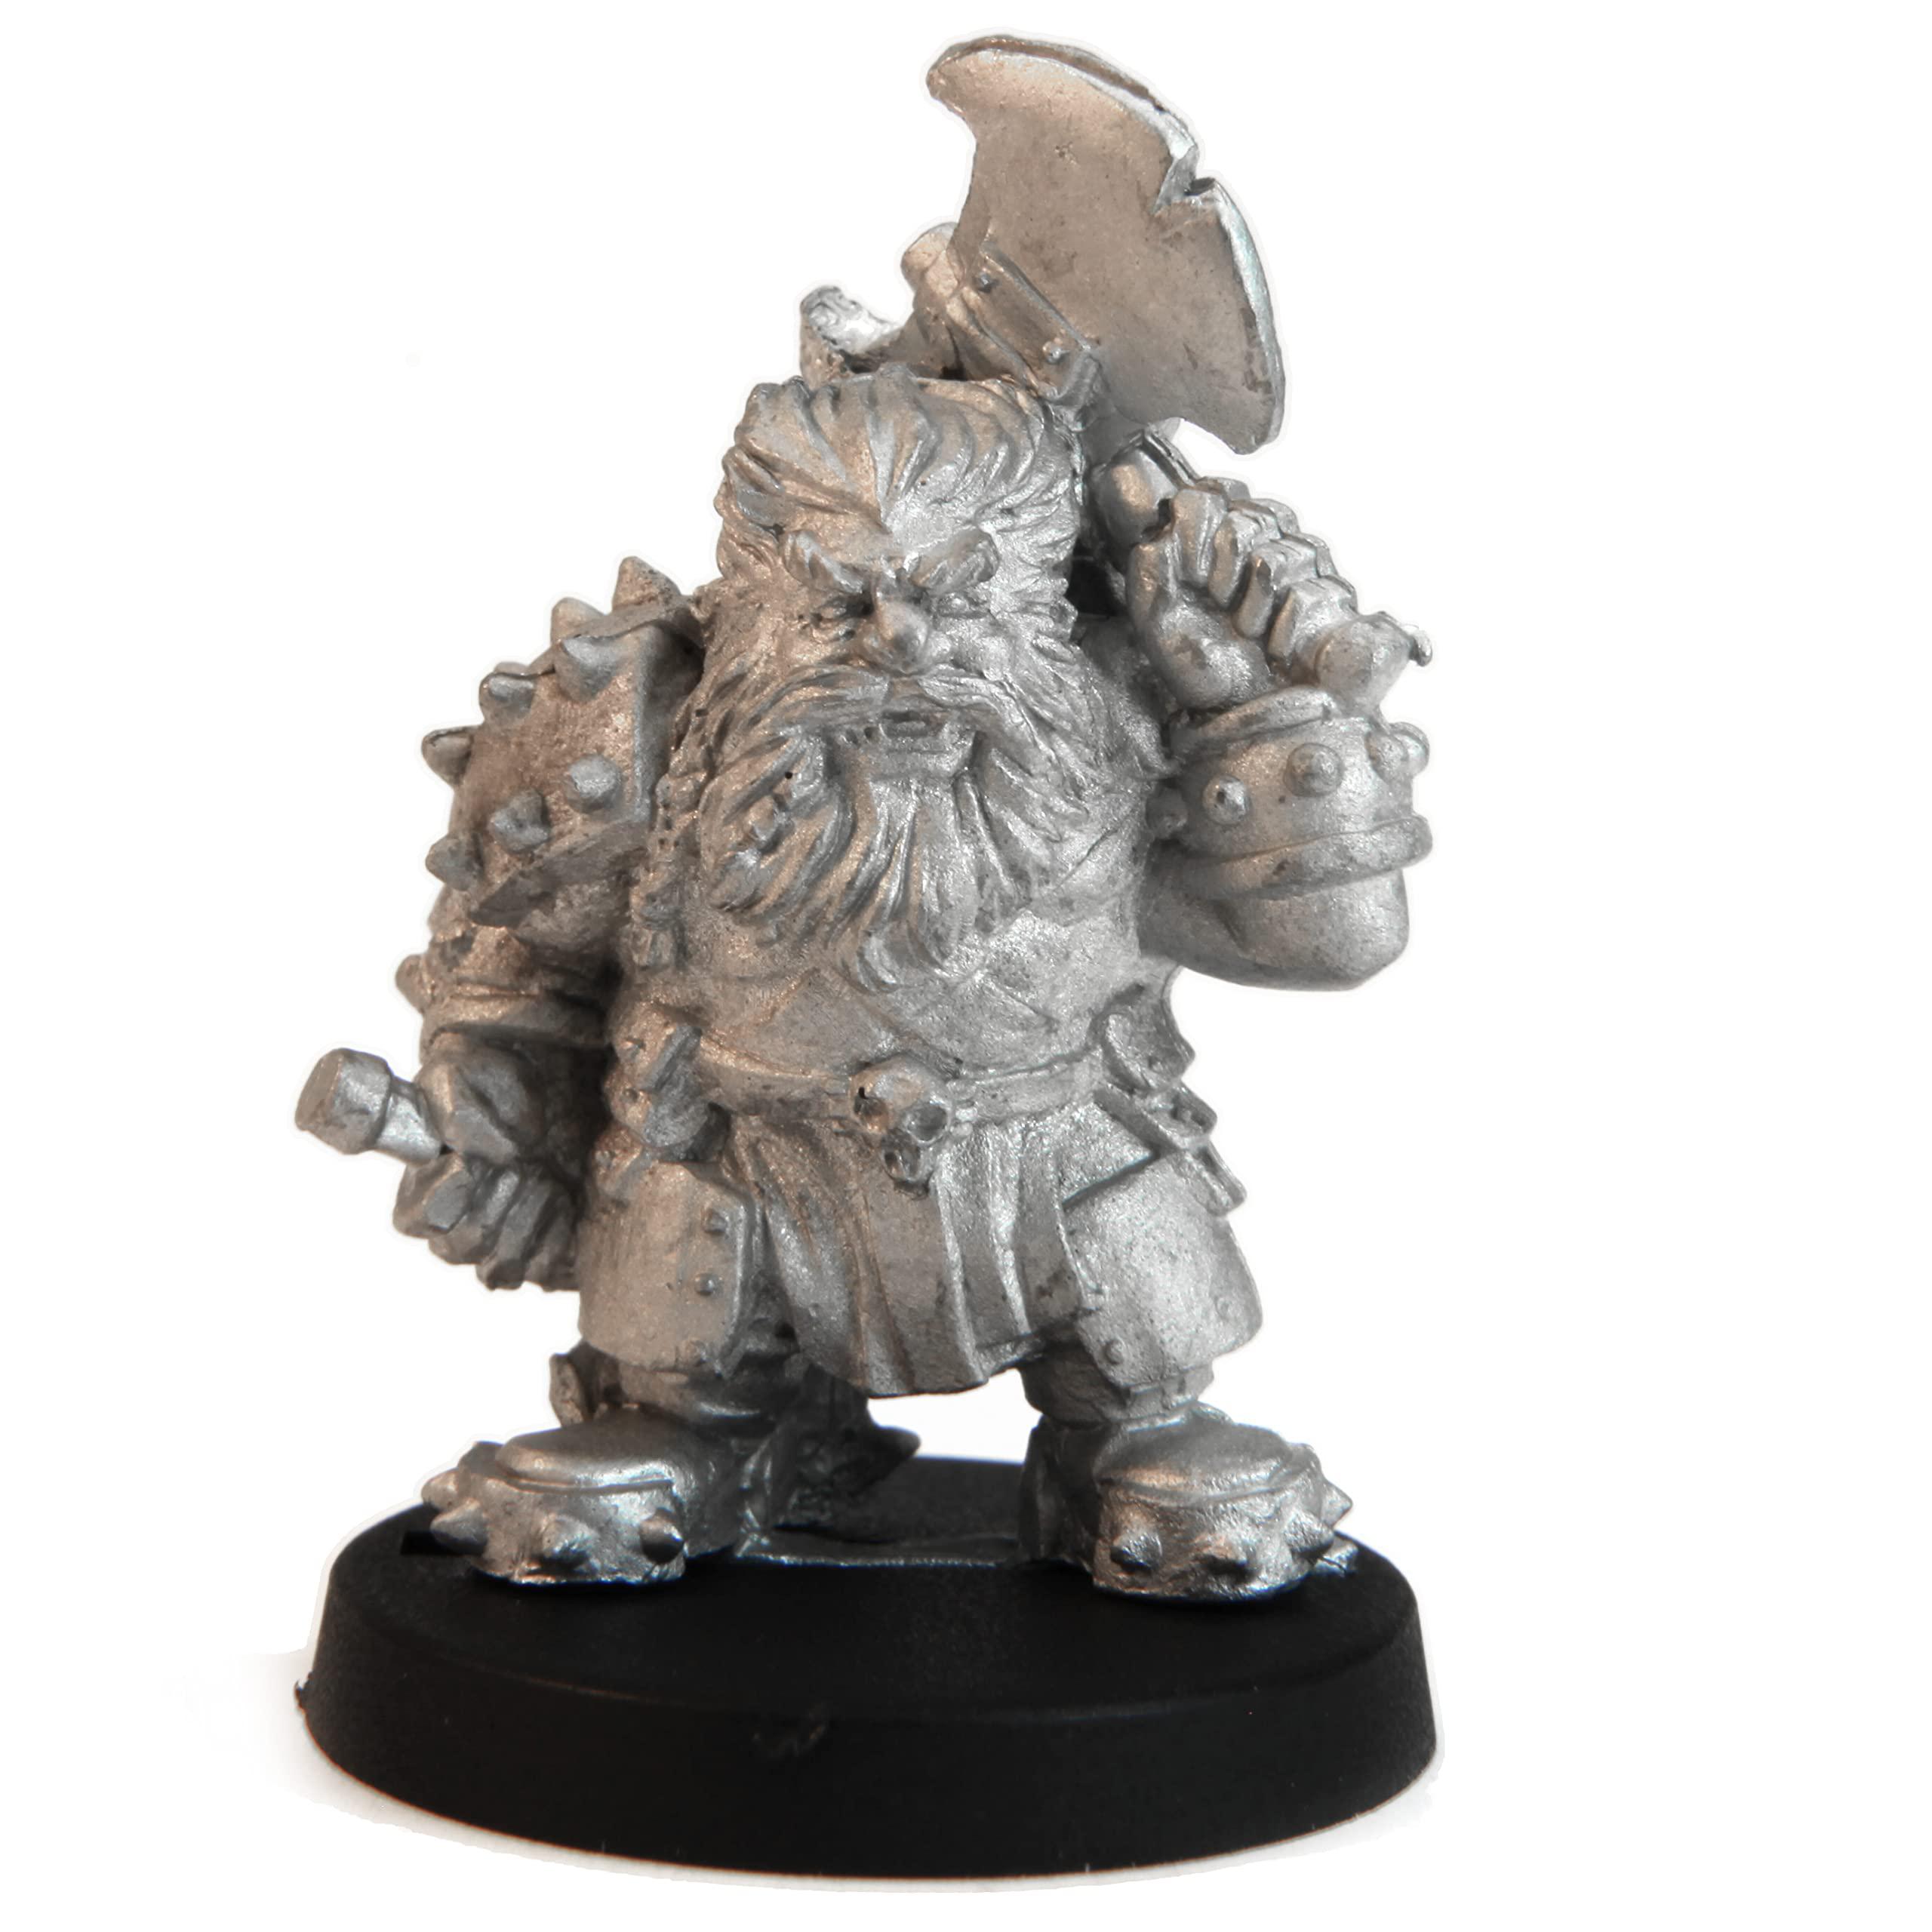 Stonehaven Miniatures stonehaven dwarf berserker miniature figure (for 28mm scale table top war games) - made in usa